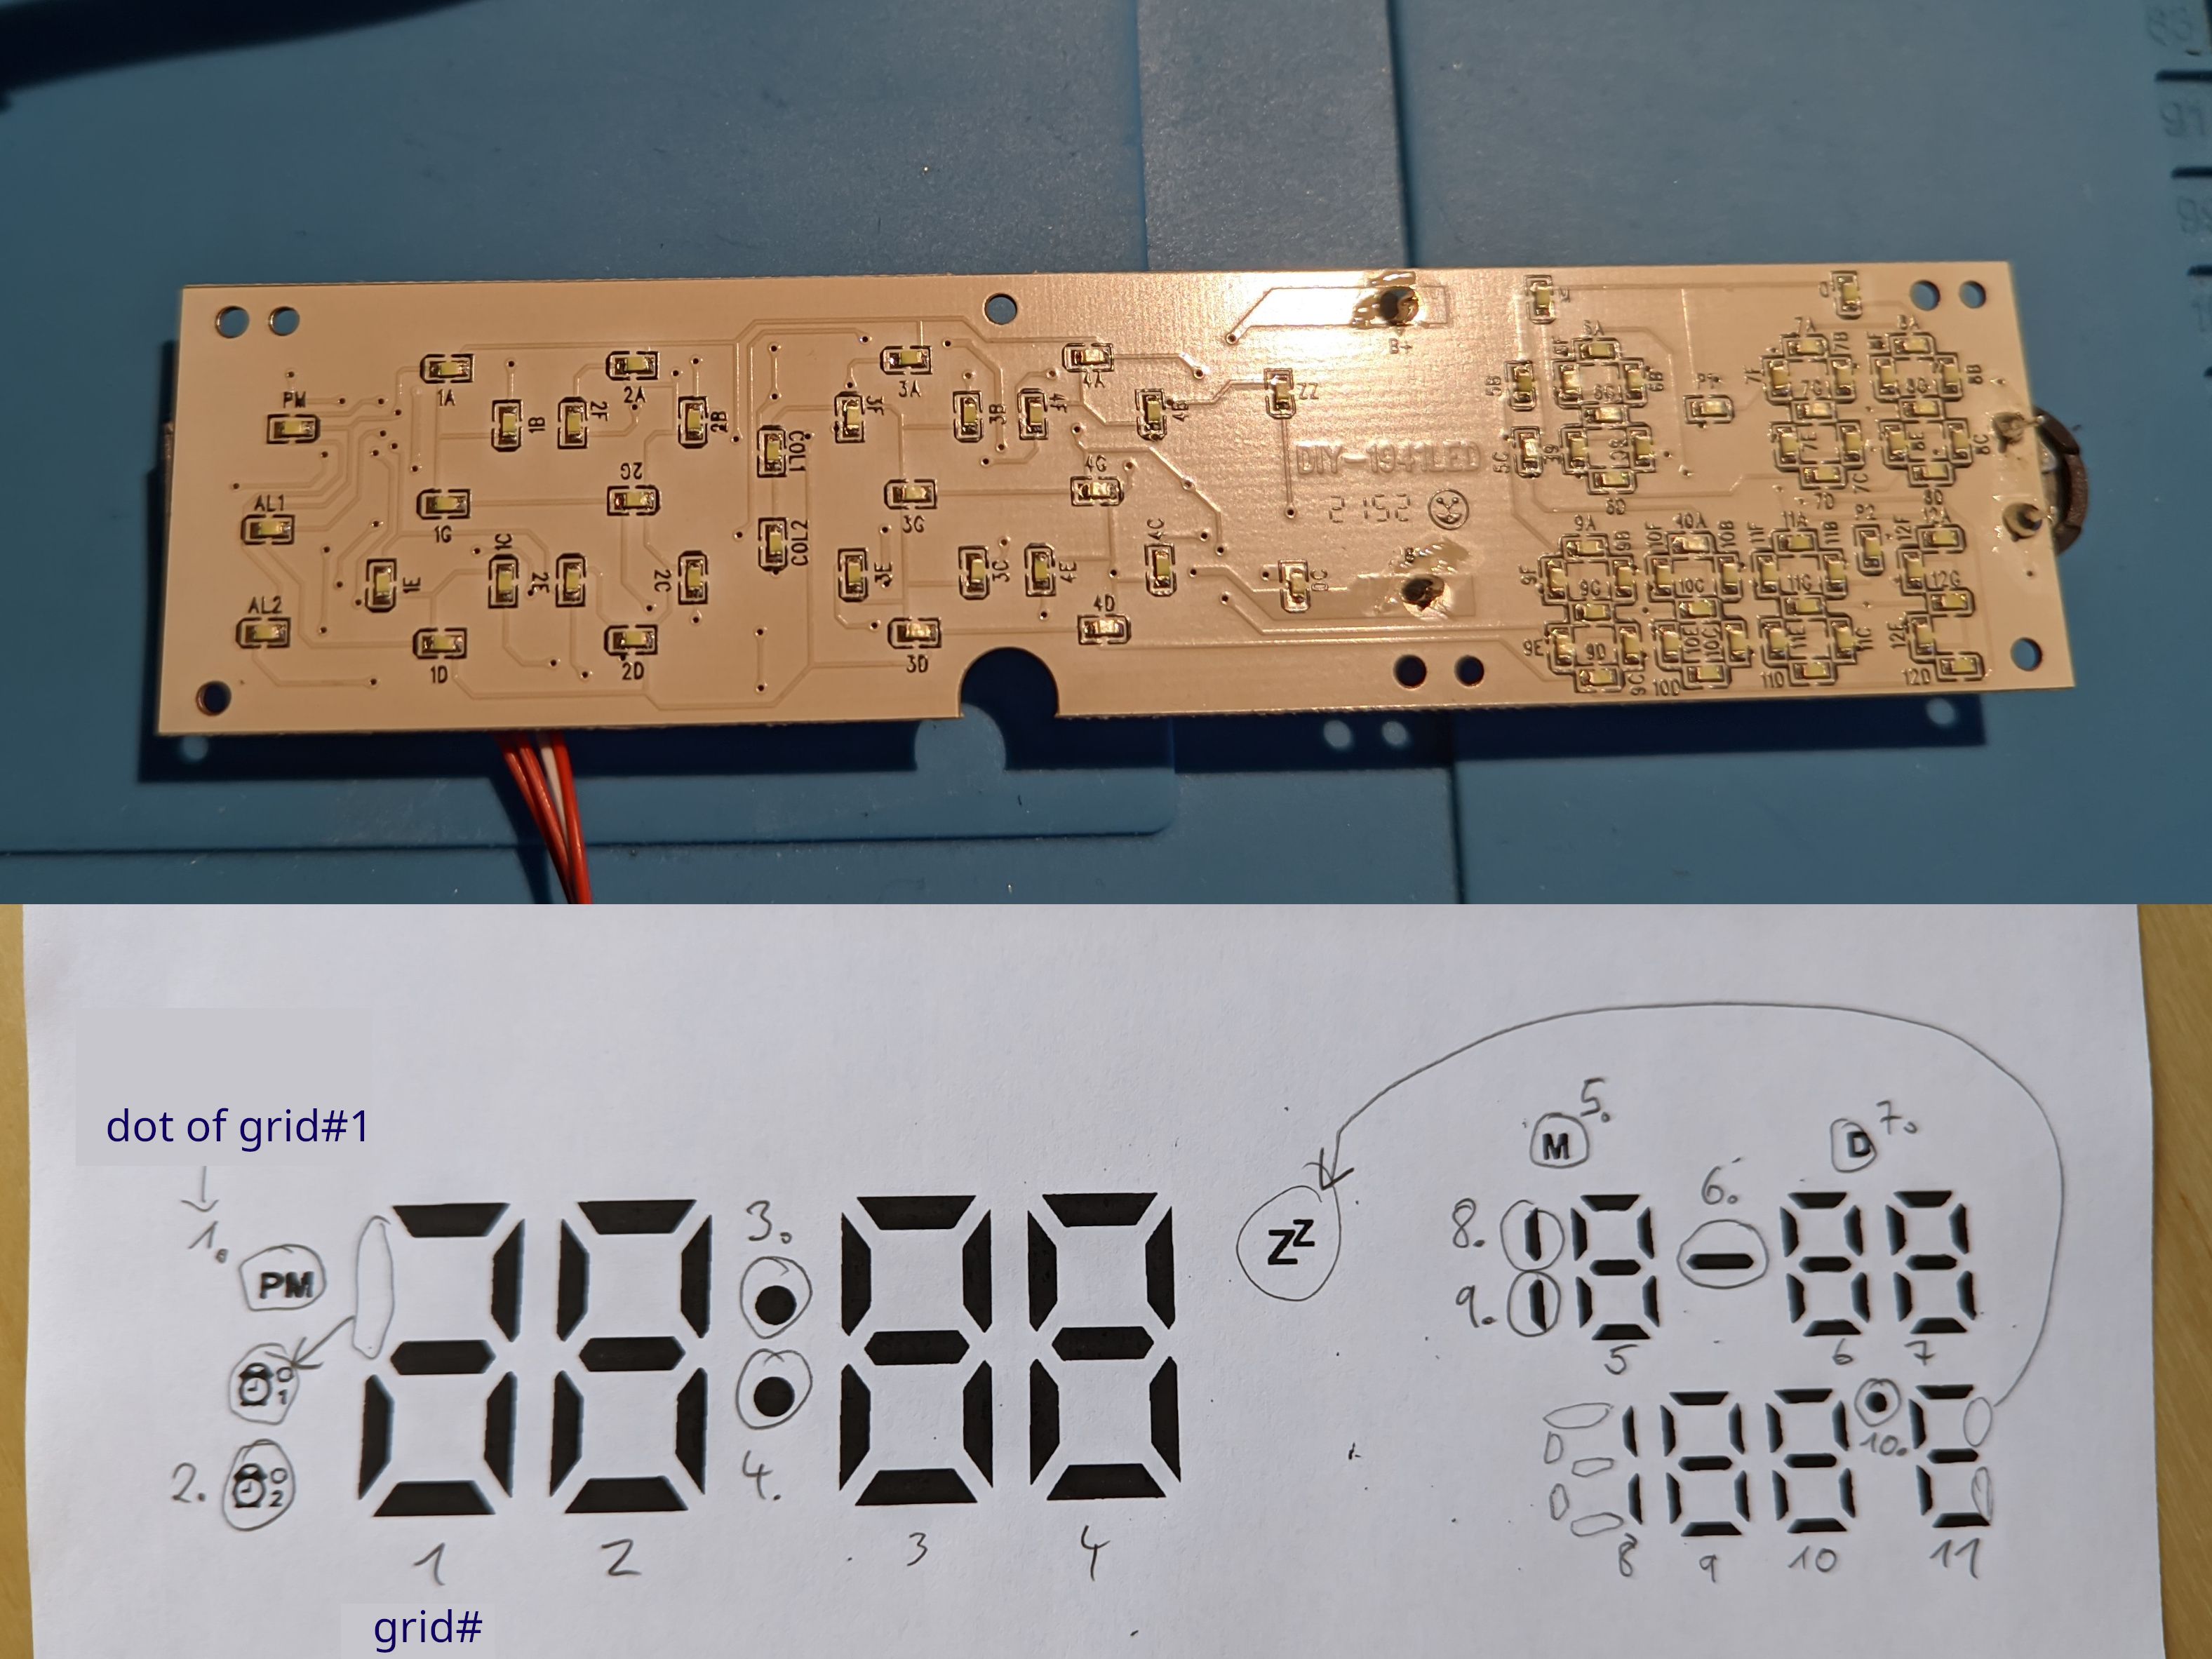 A composite image showing the display's front with a lot of white 0603 LEDs and a sheet of paper showing which grids on the display controller they are connected to